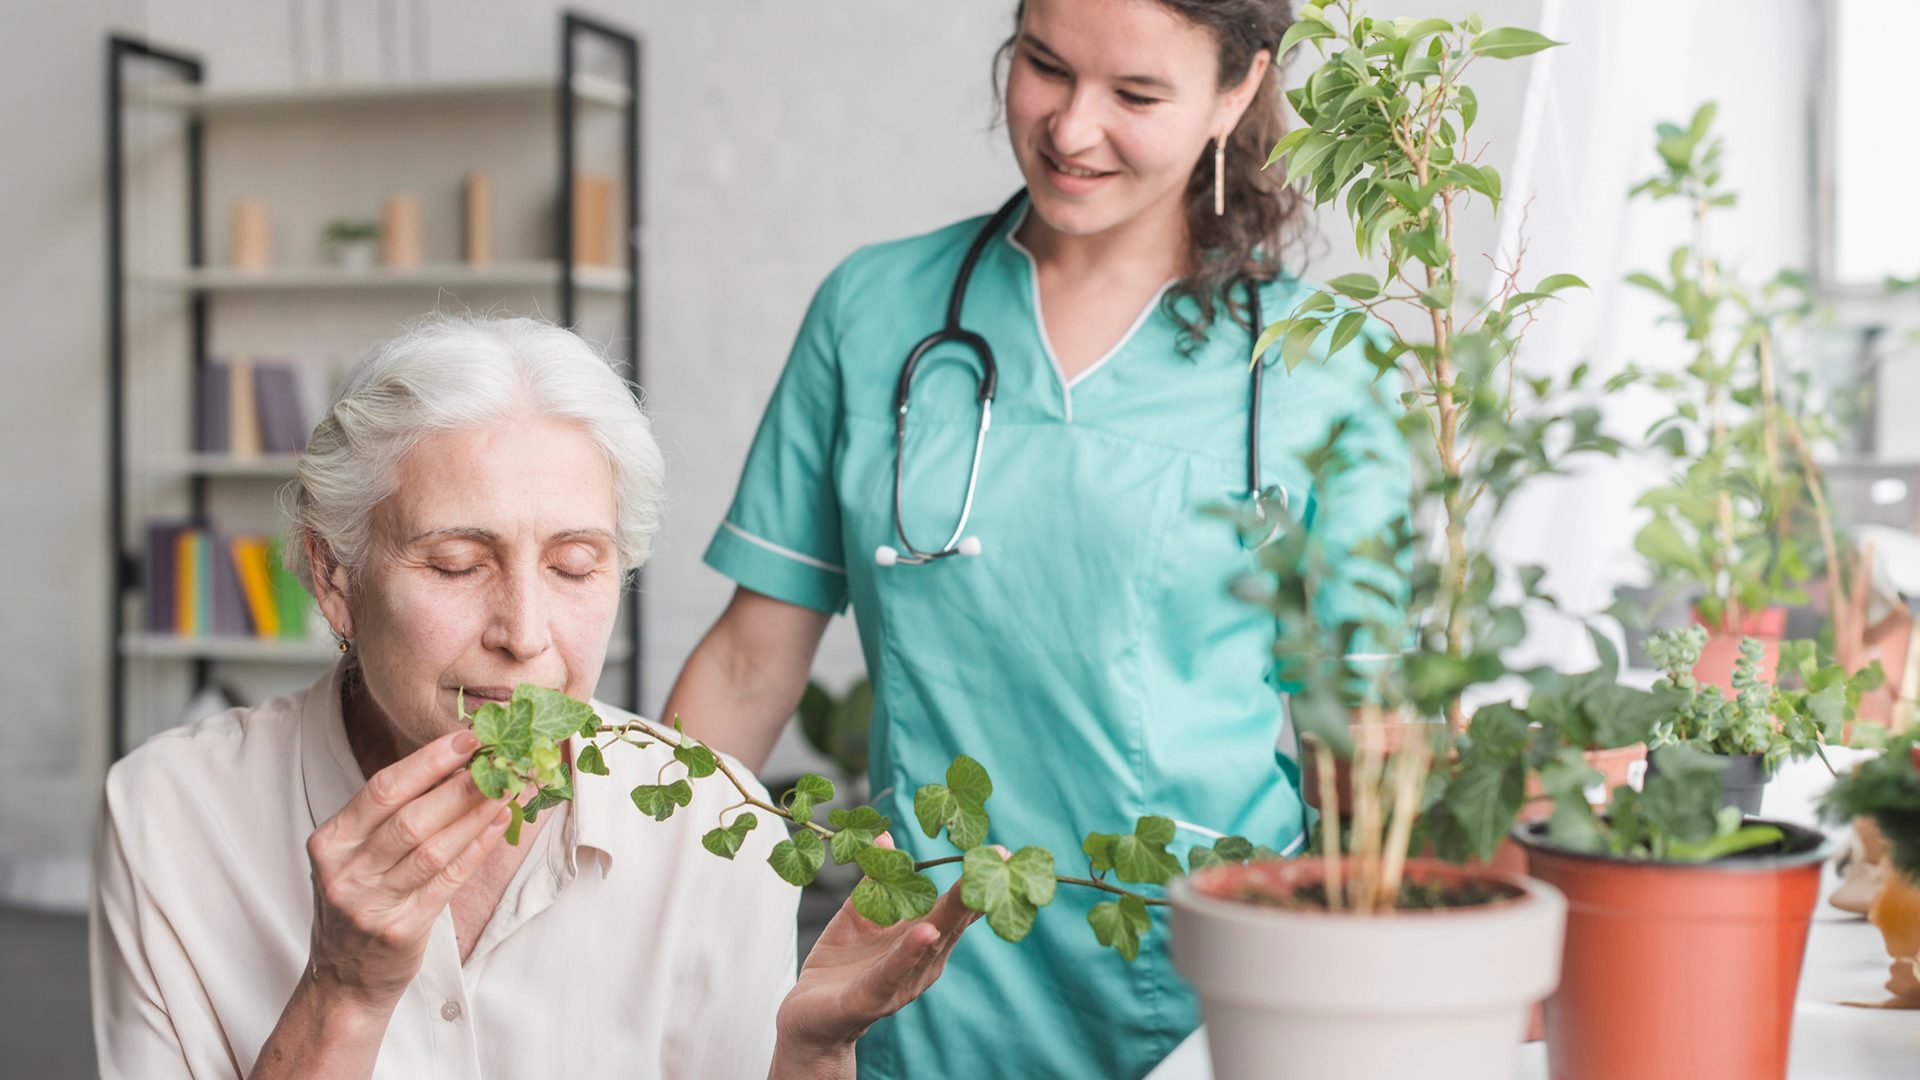 A caregiver and their client, a person with dementia, are seen tending to a plant in a garden. The image illustrates the therapeutic benefits of gardening for individuals with dementia, promoting relaxation and sensory stimulation.